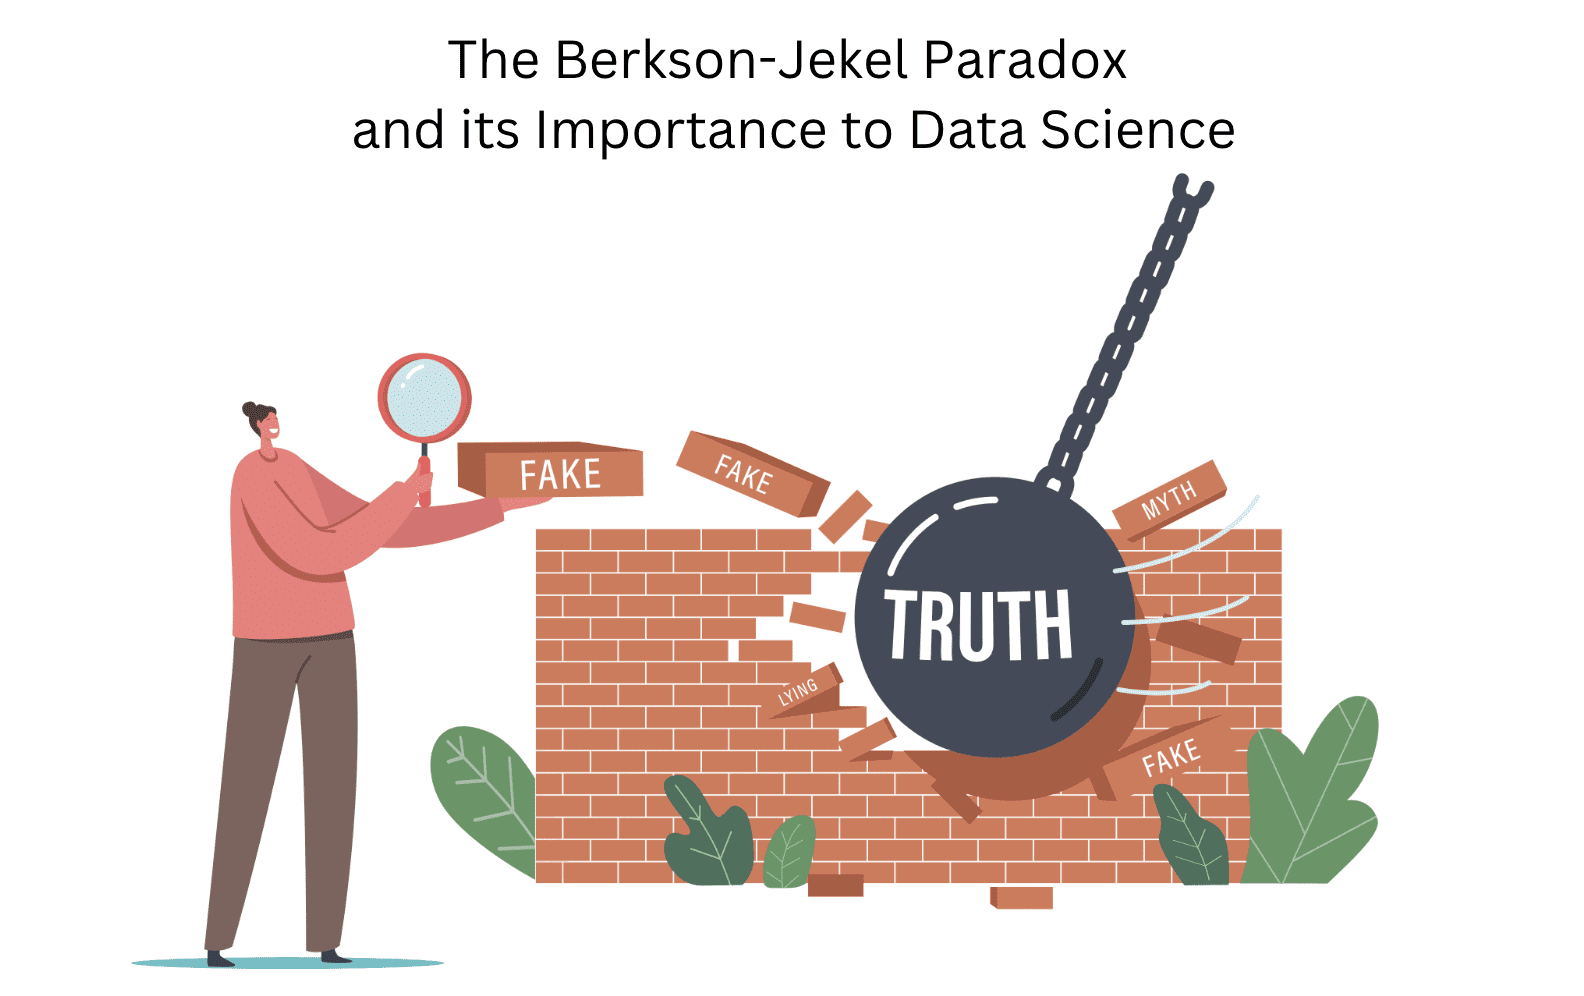 The Berkson-Jekel Paradox and its Importance to Data Science